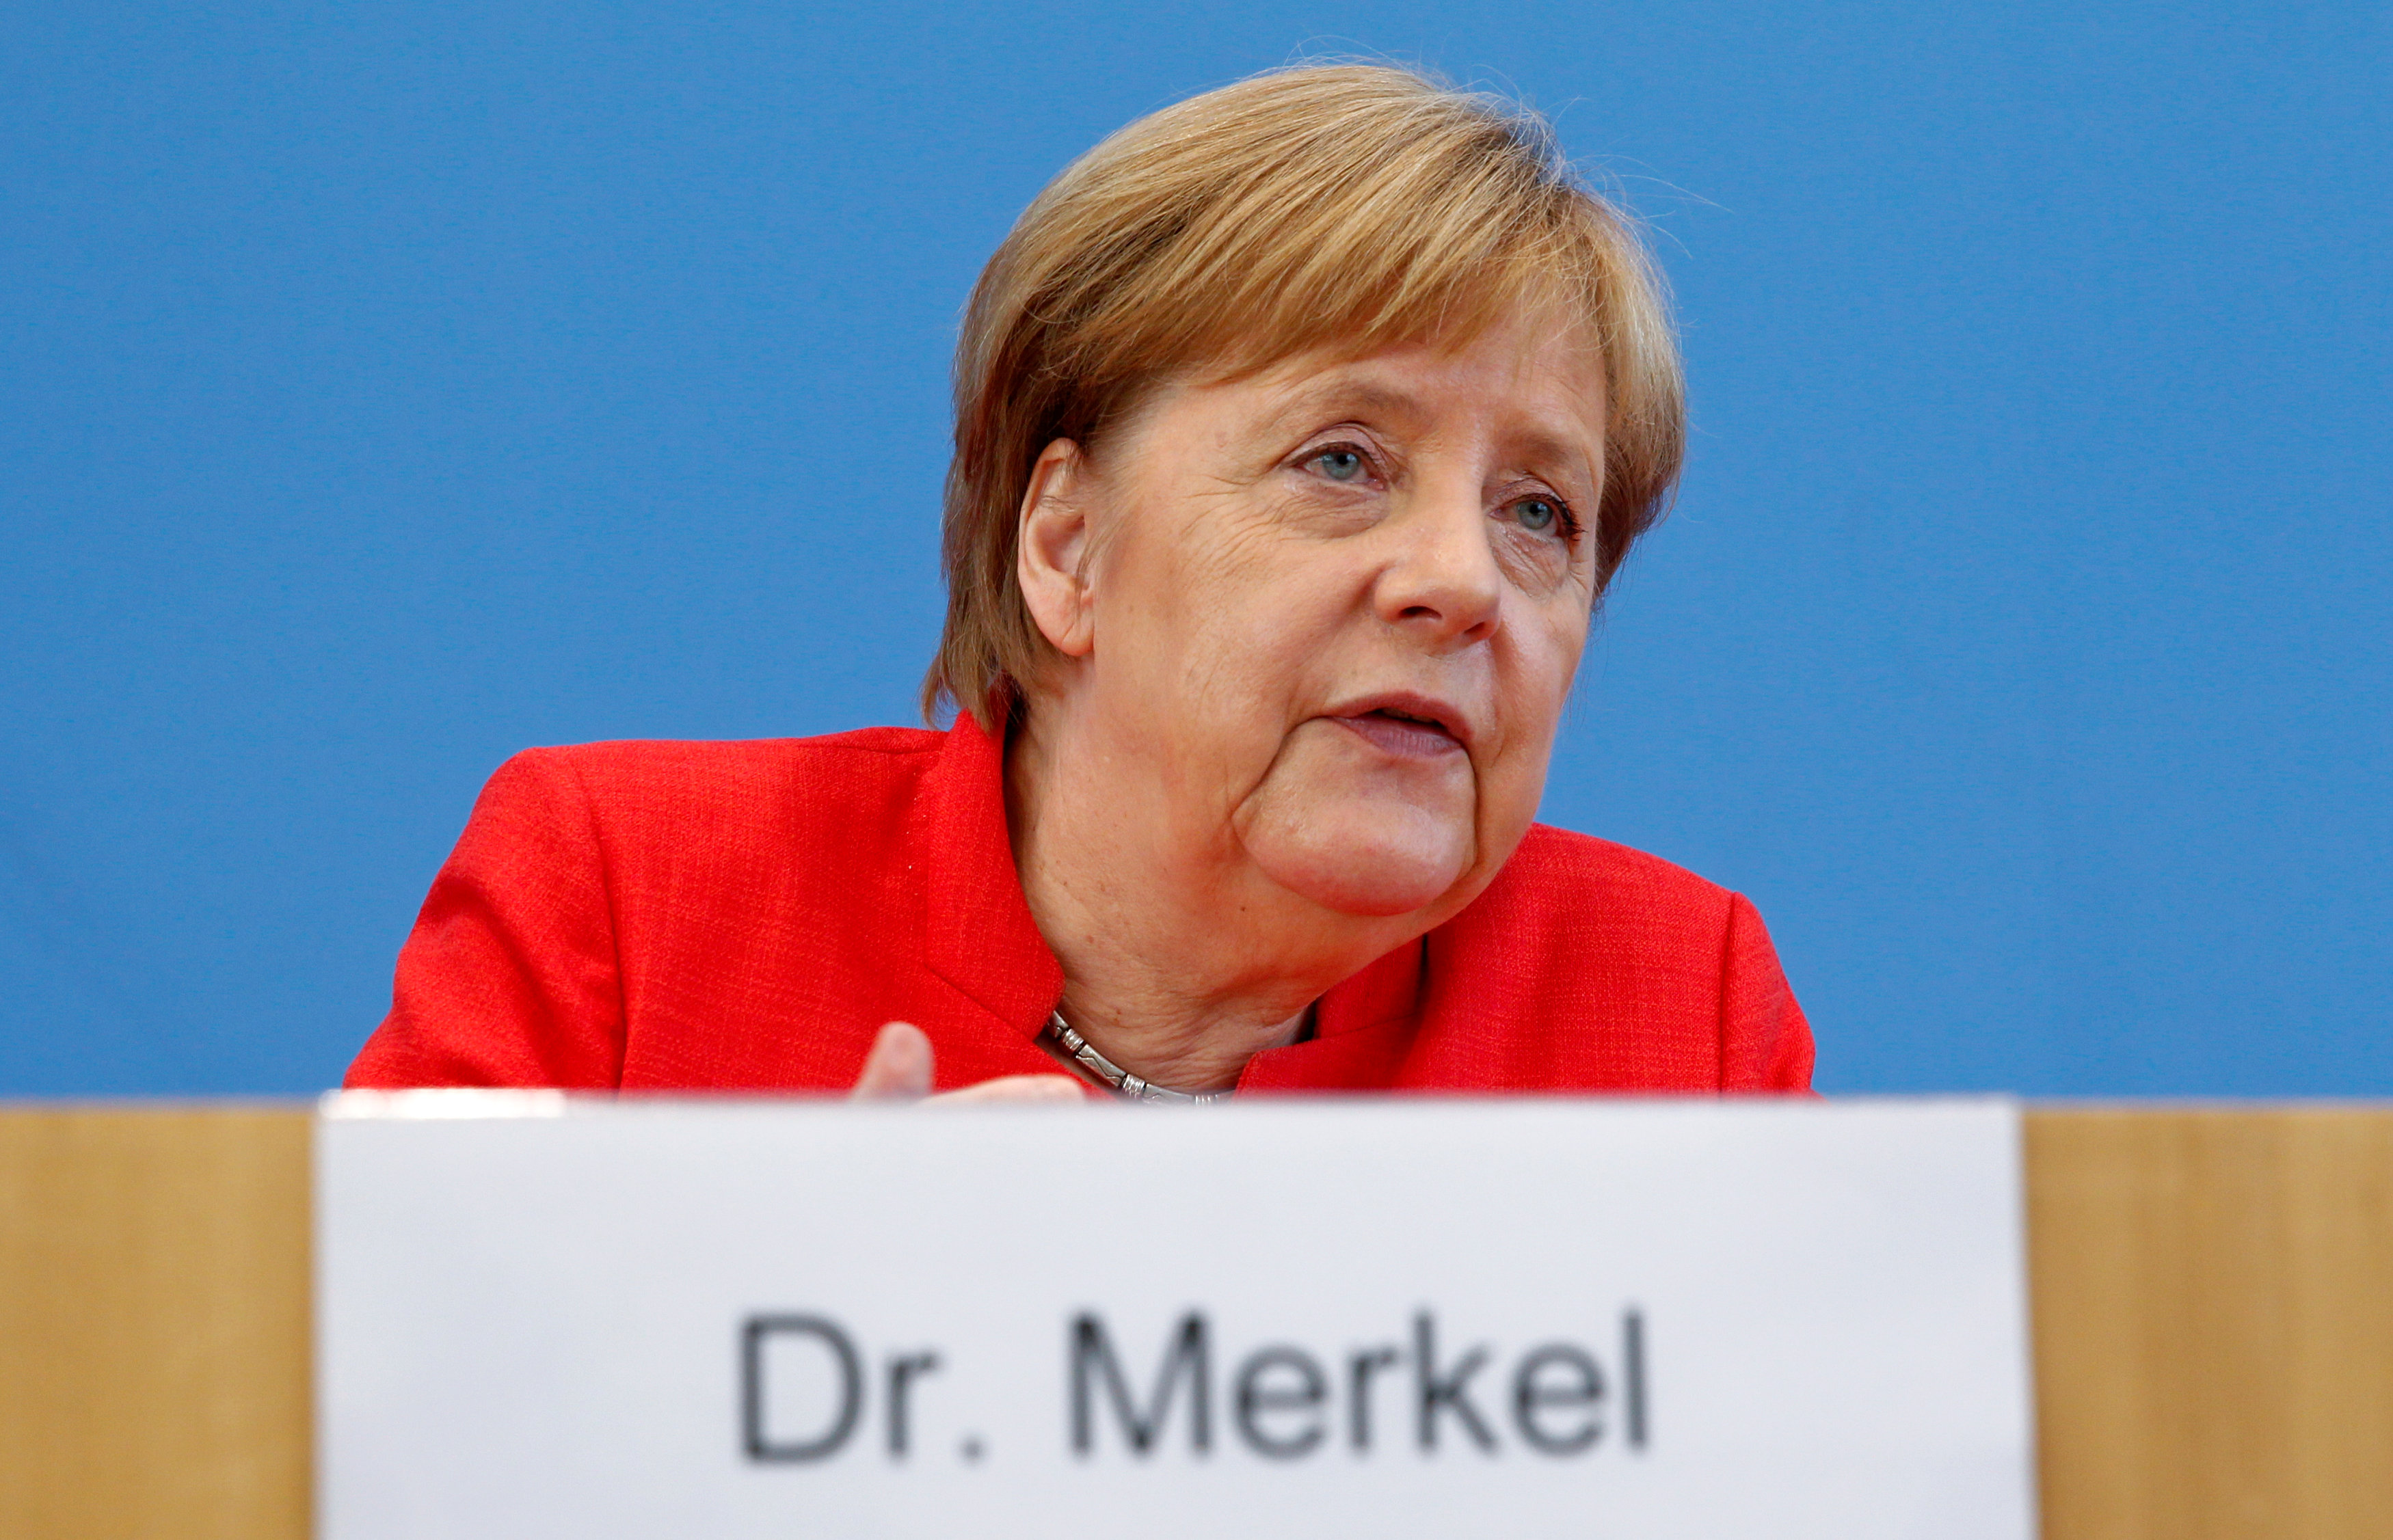 Merkel welcomes end of bailout programme, says its impact will continue